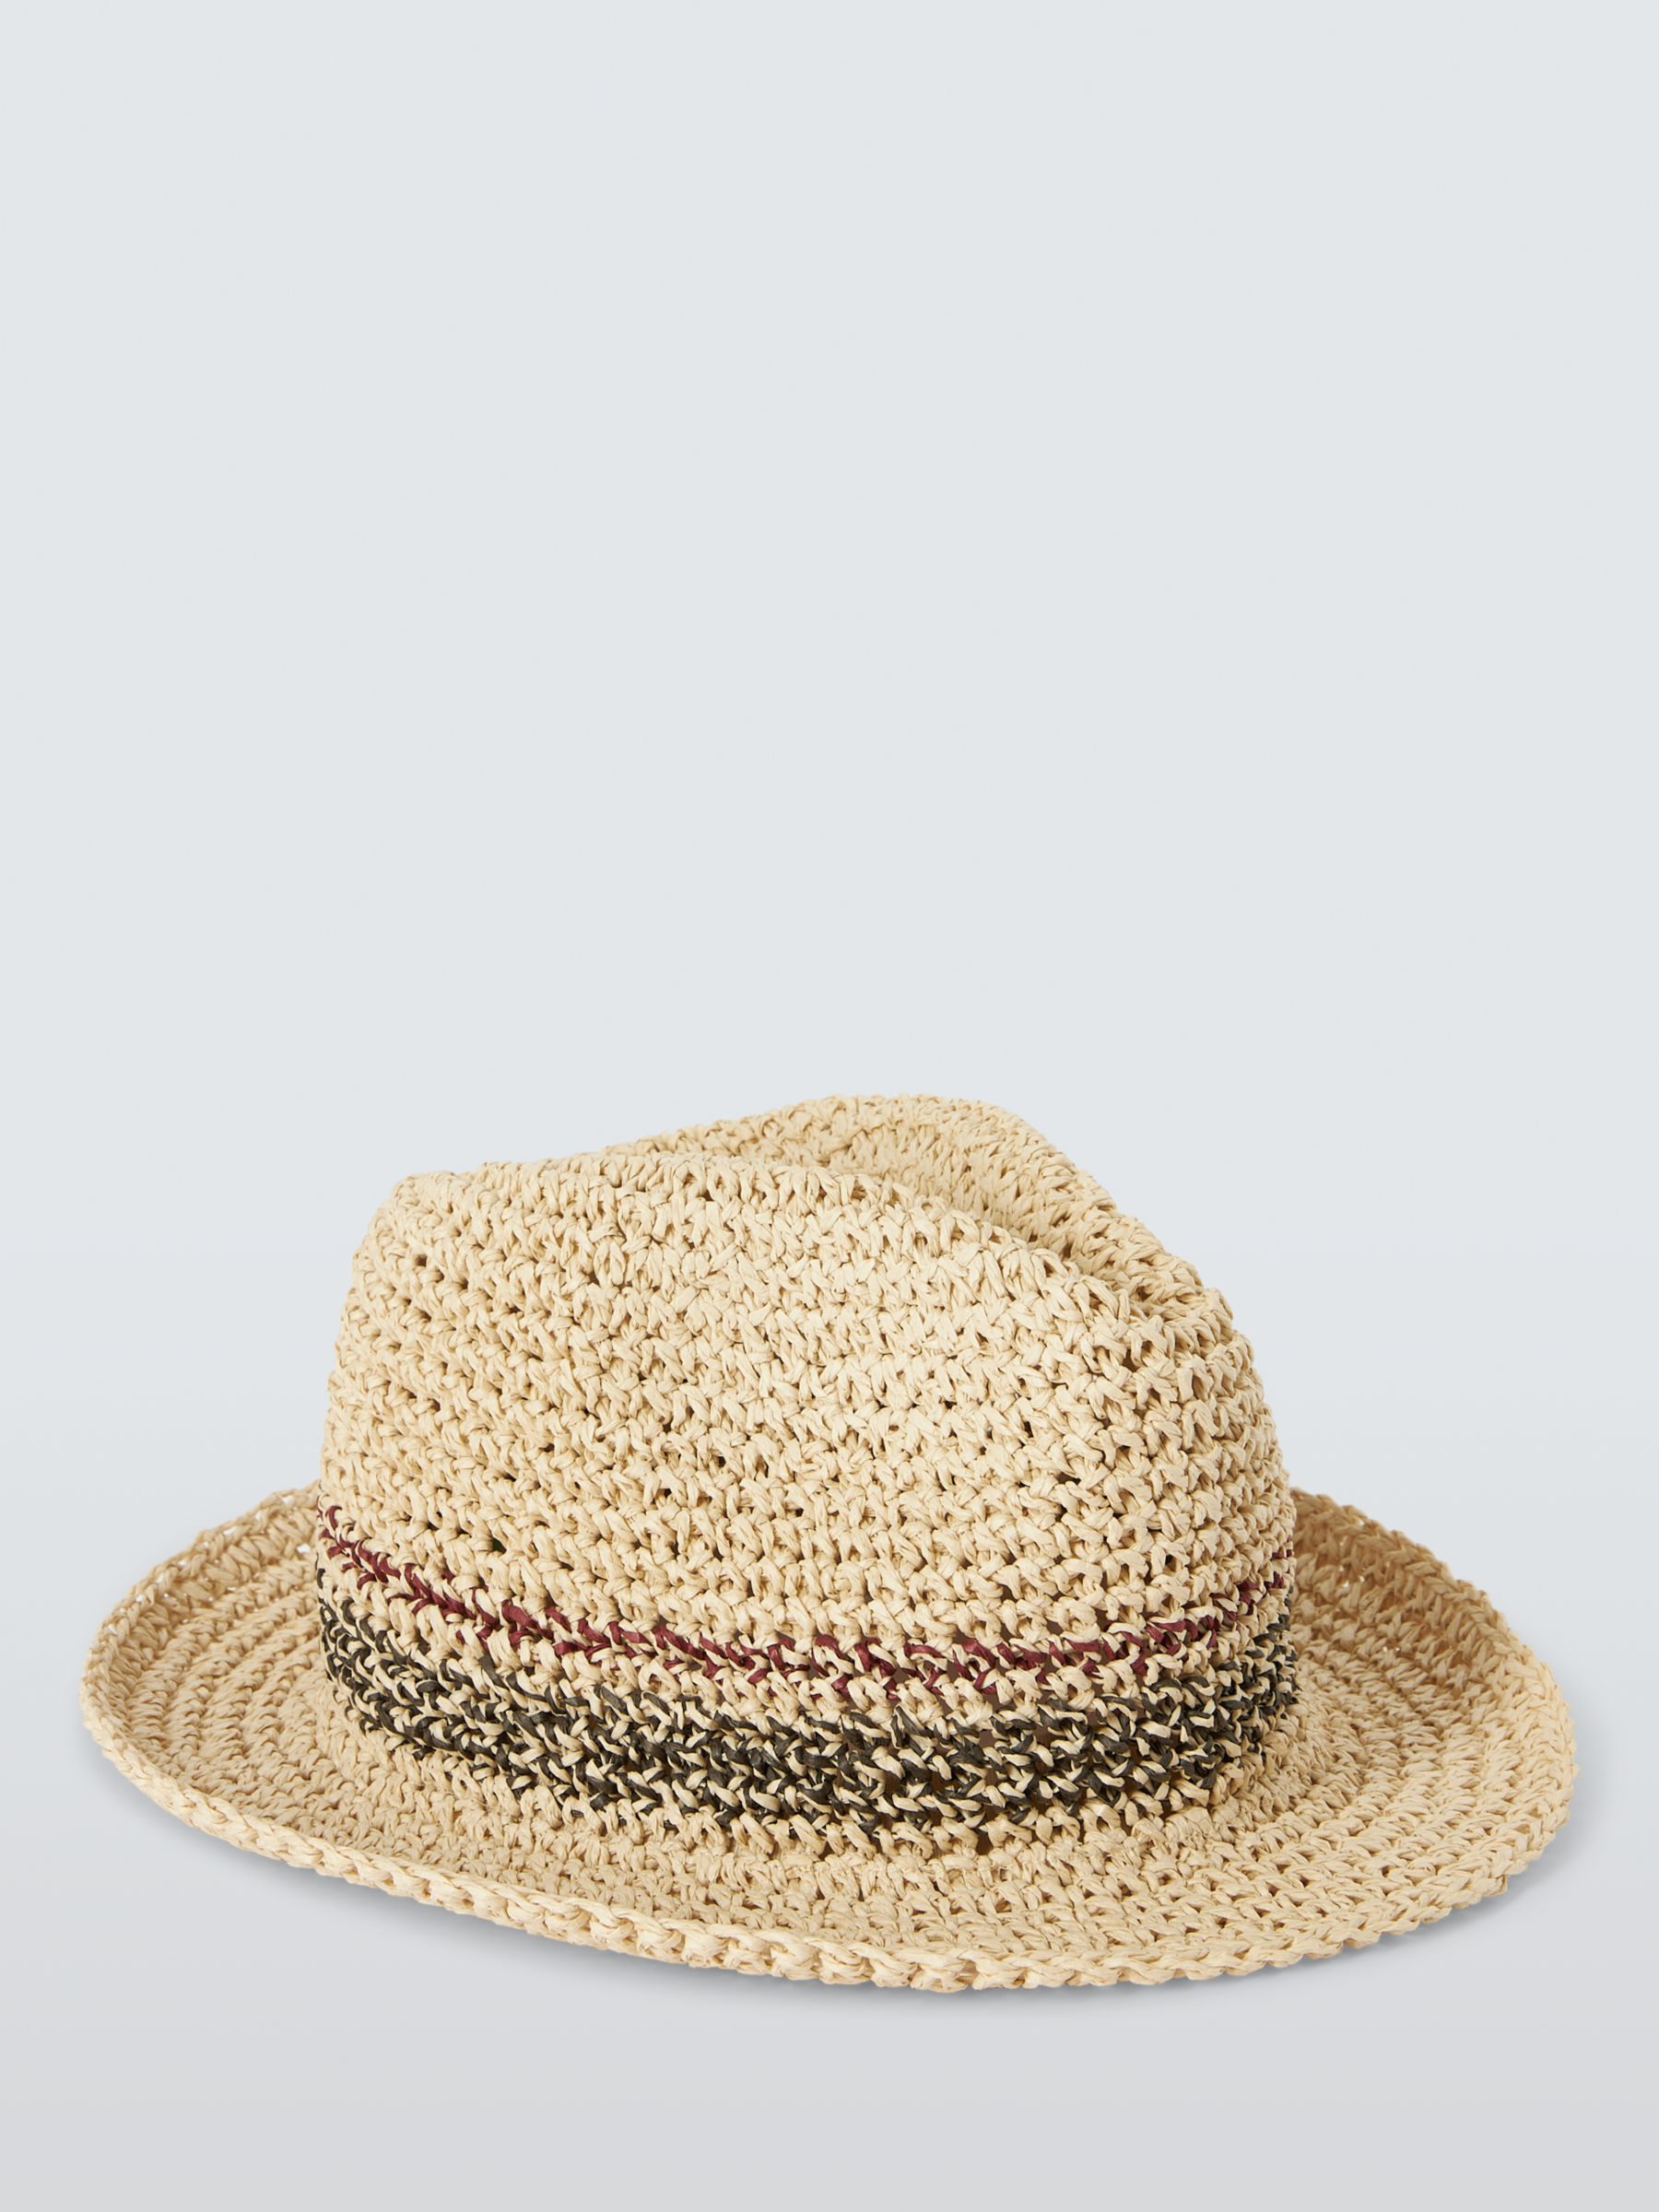 John Lewis Straw Trilby Hat, Natural, S-M